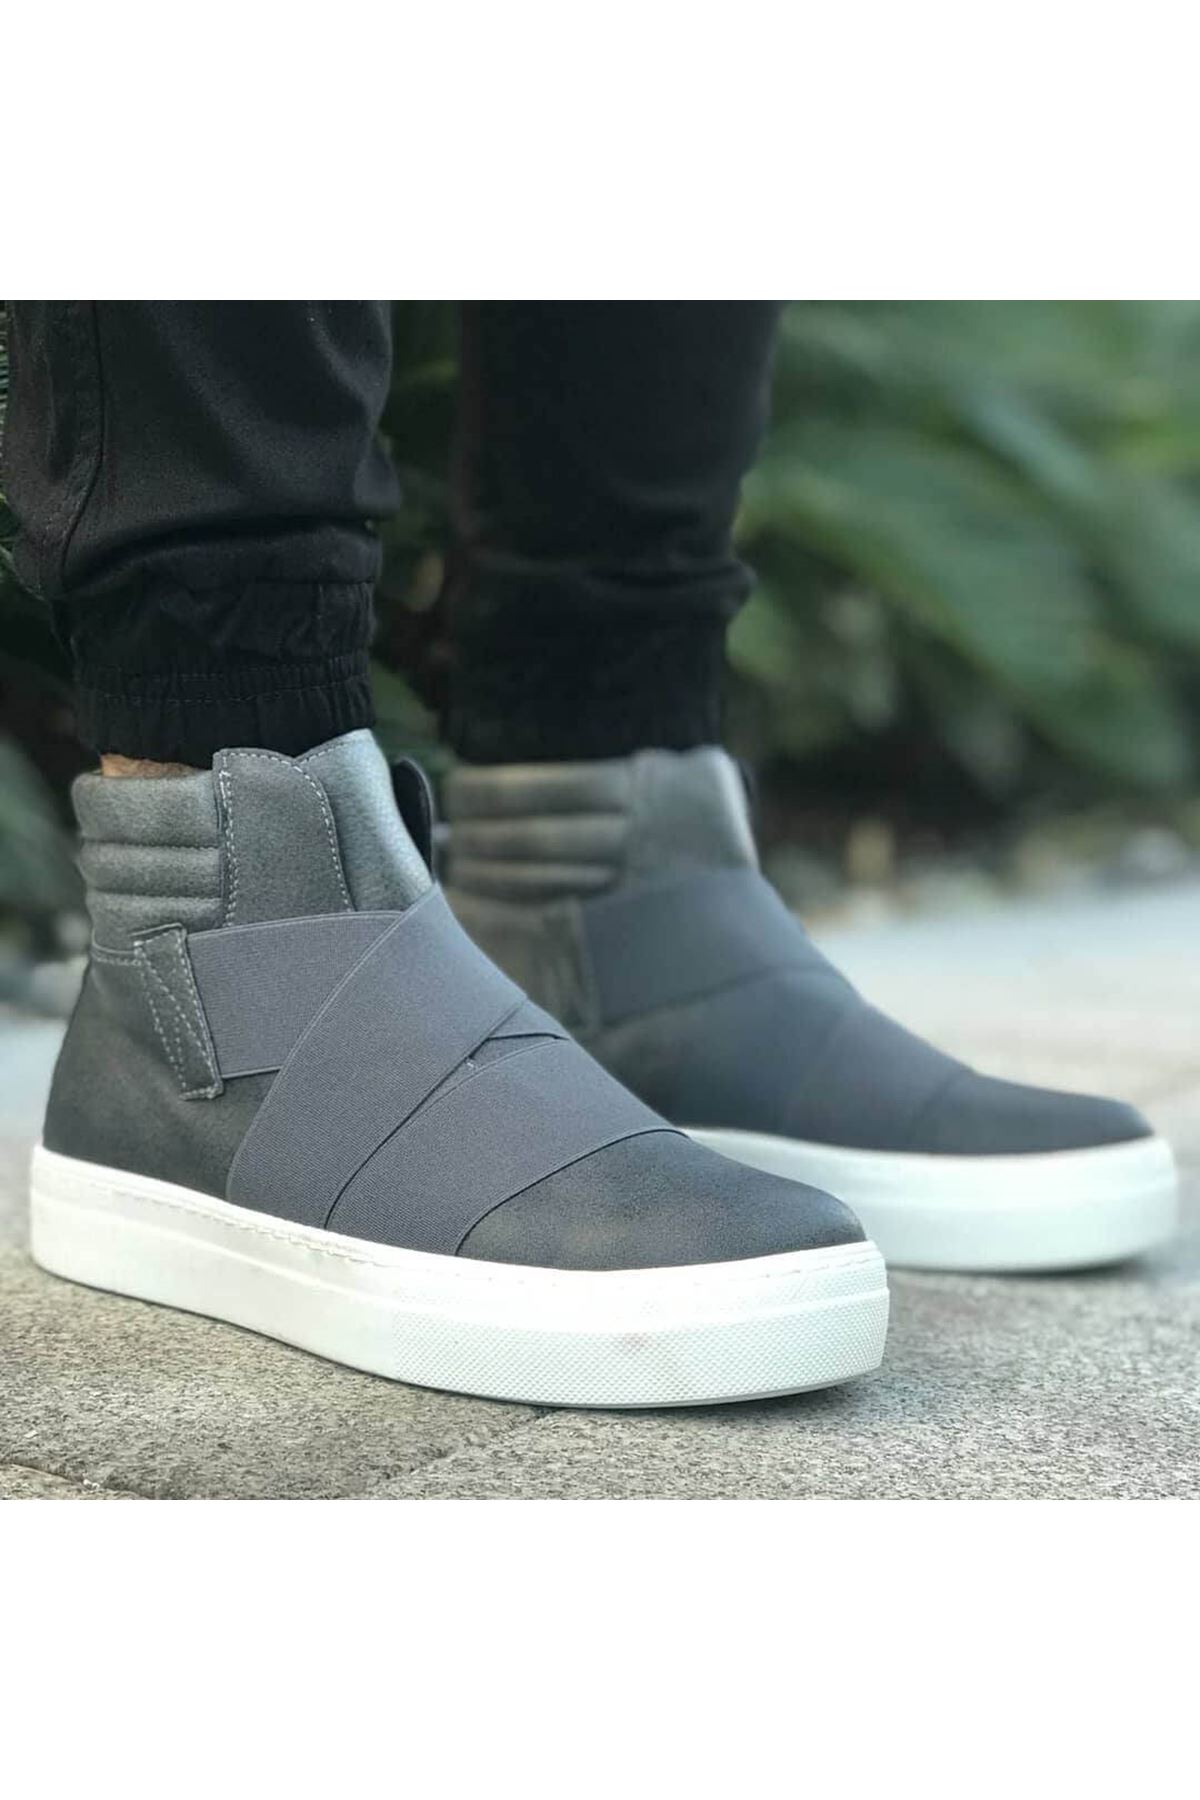 Chekich Men's Boots Navy Blue Faux Leather Elastic Band Closure Spring & Autumn Seasons High Quality Sneakers 2021 Fashion Wedding Male Solid Basic Comfortable Flexible Odorless Ankle Sewing Base Office Nature CH023 V4